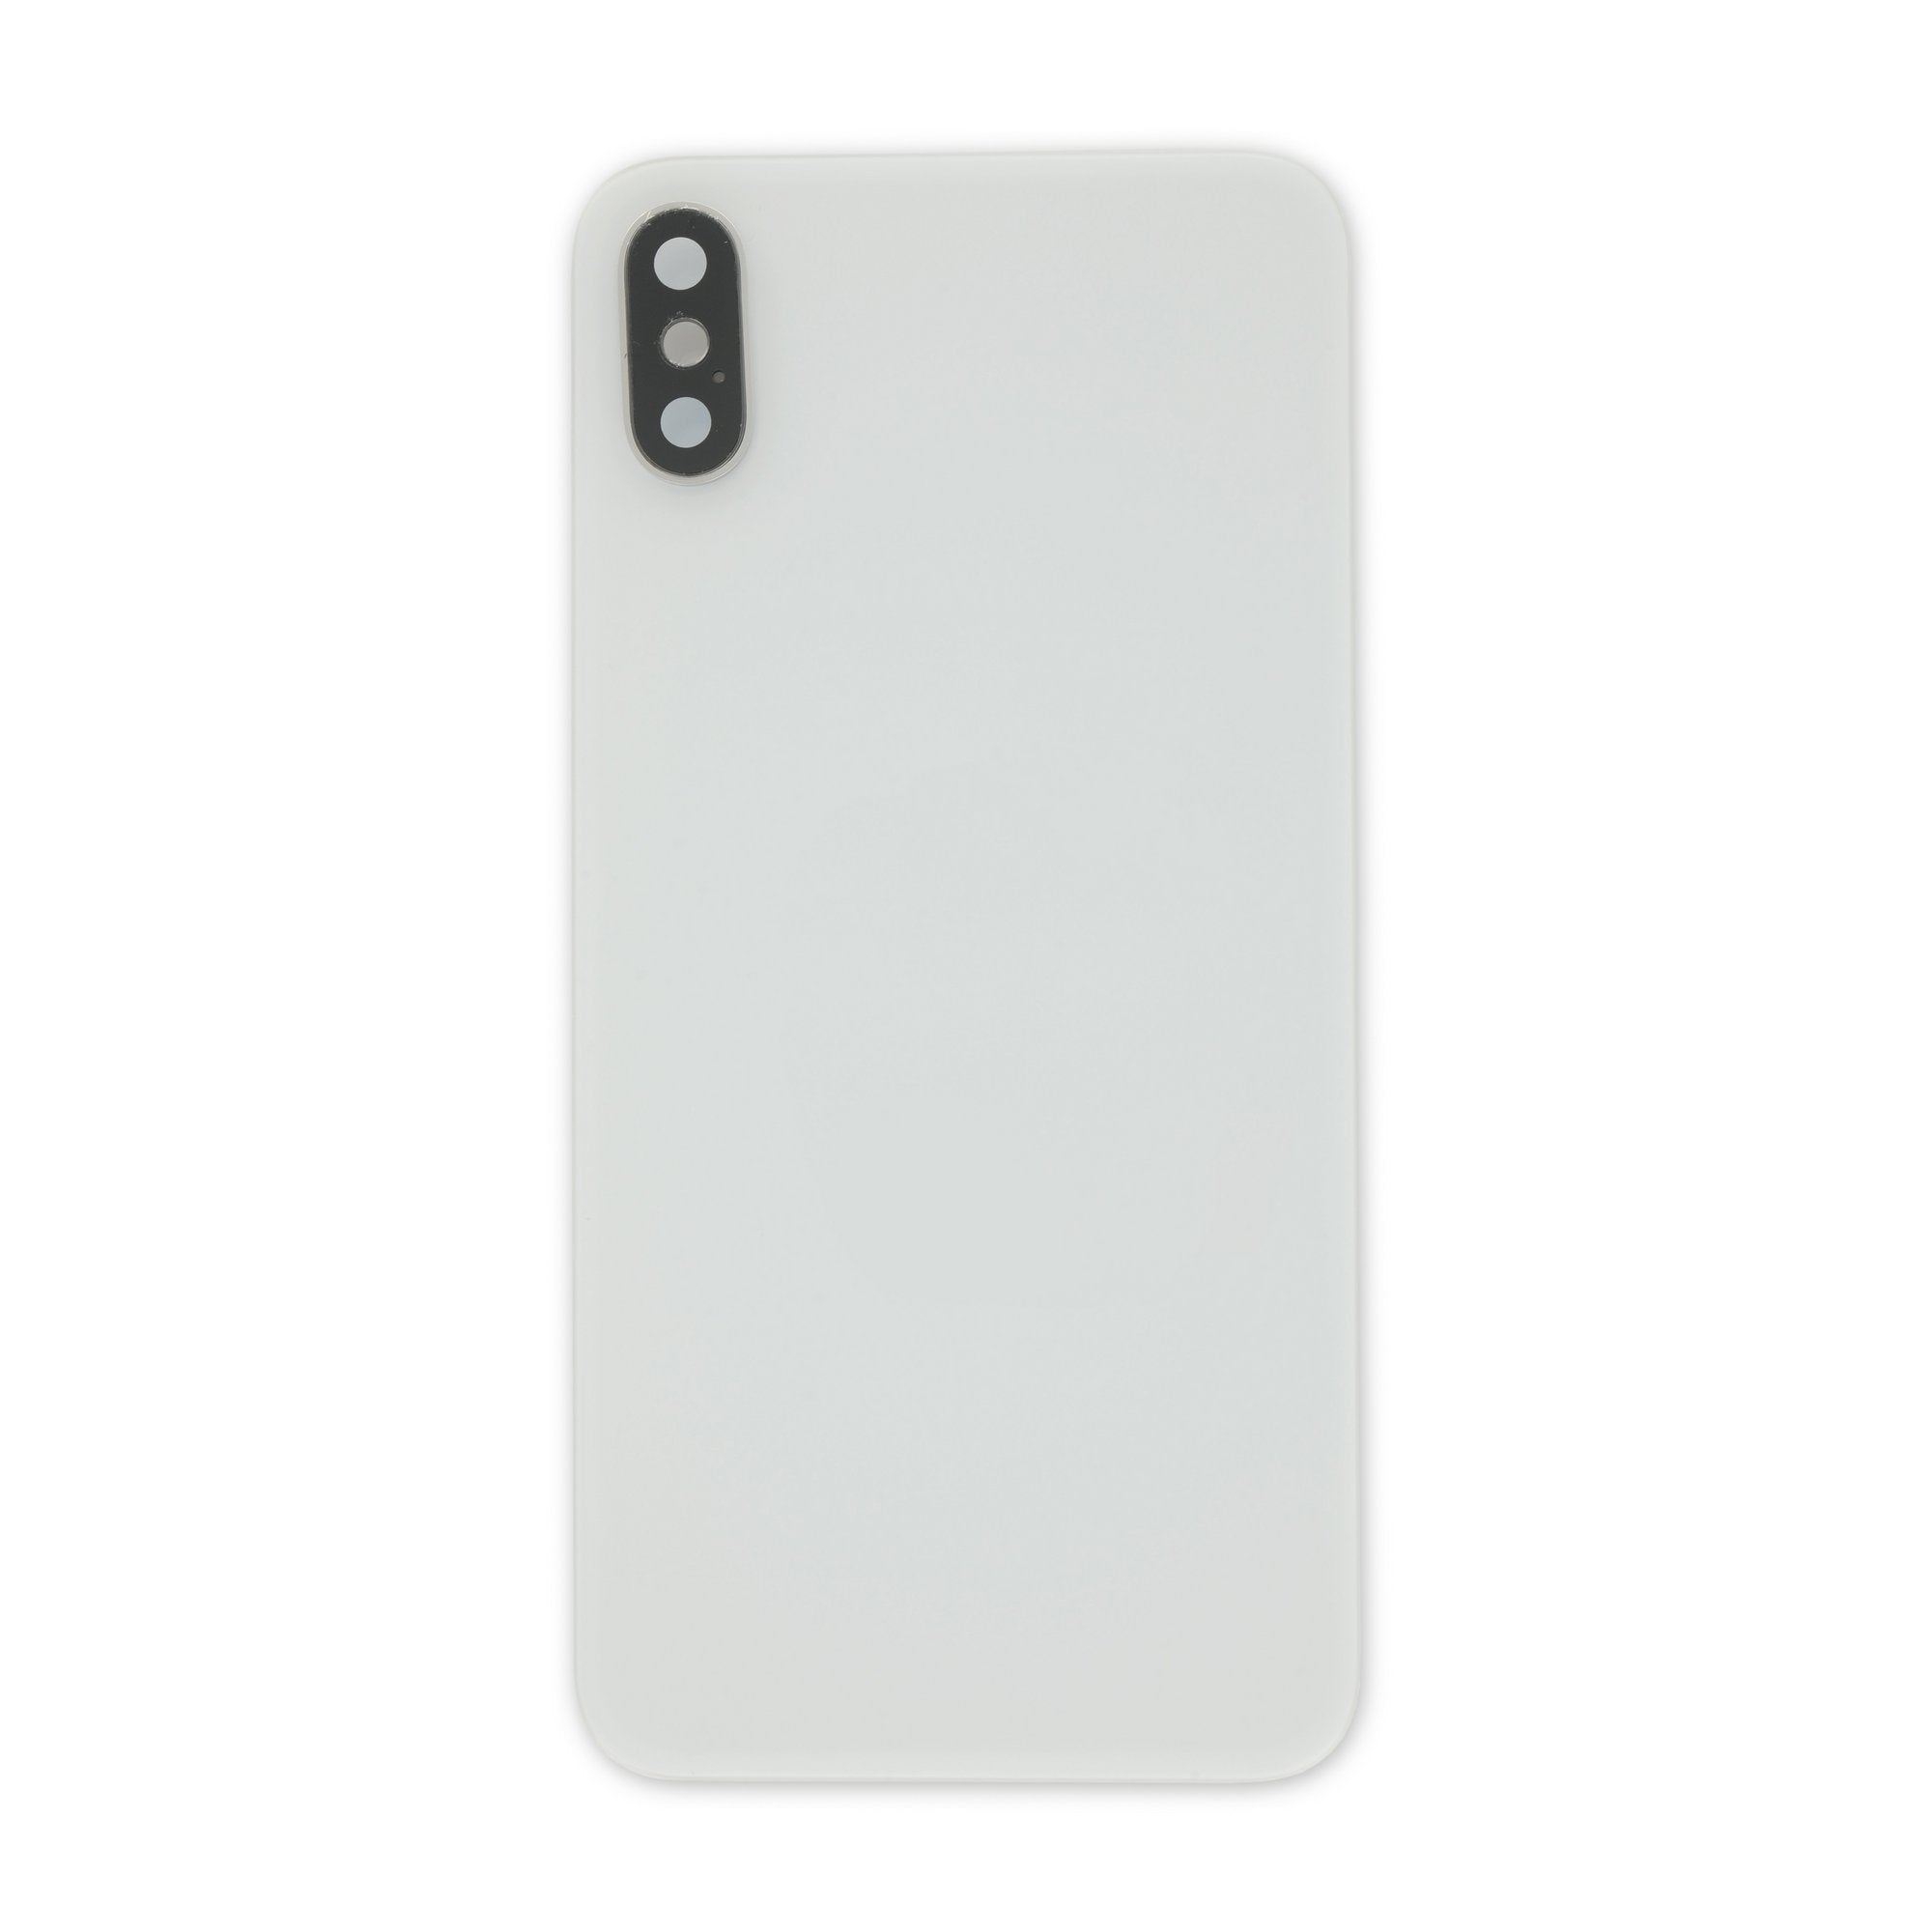 iPhone XS Aftermarket Blank Rear Glass Panel with Lens Cover White New